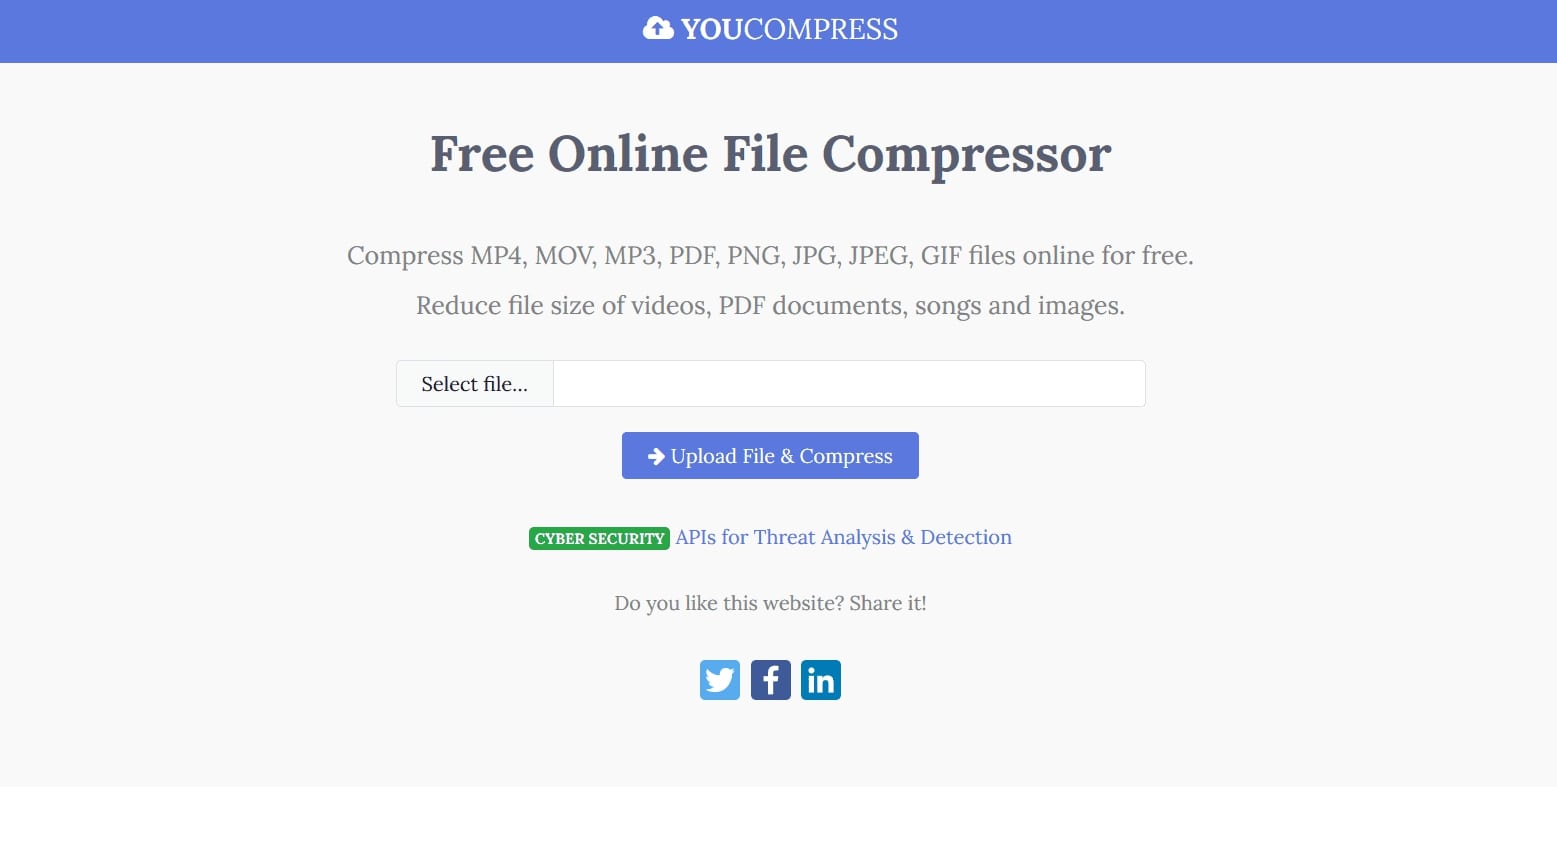 YouCompress Features